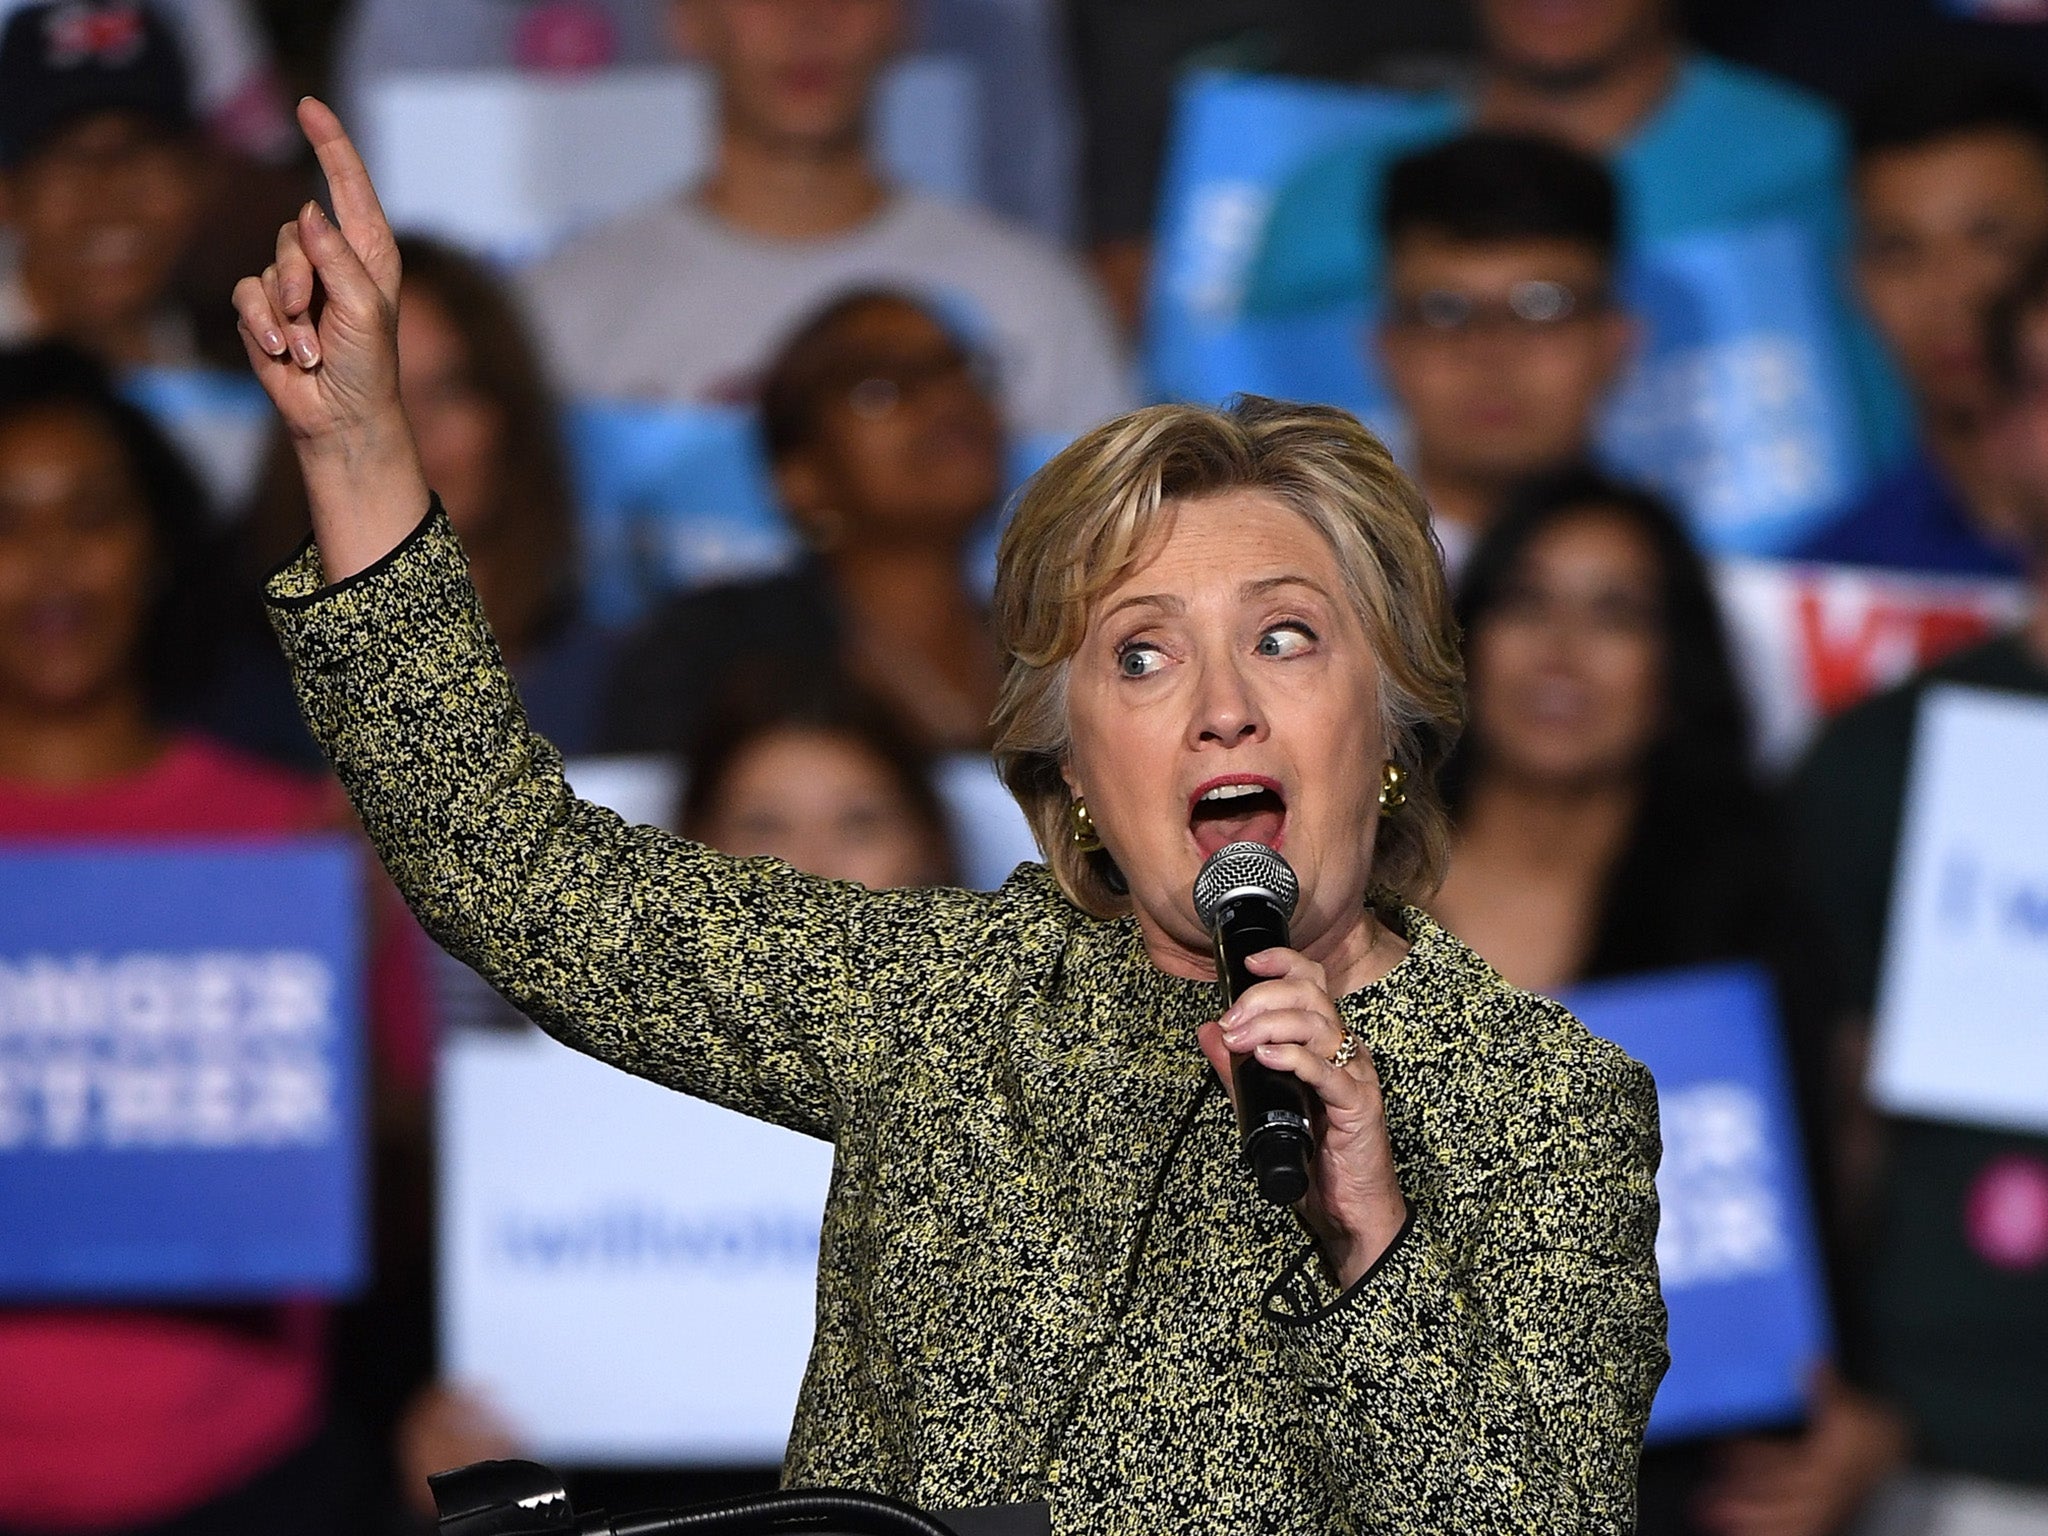 Ms Clinton did not address the matter directly at a campaign event in Iowa after the news broke